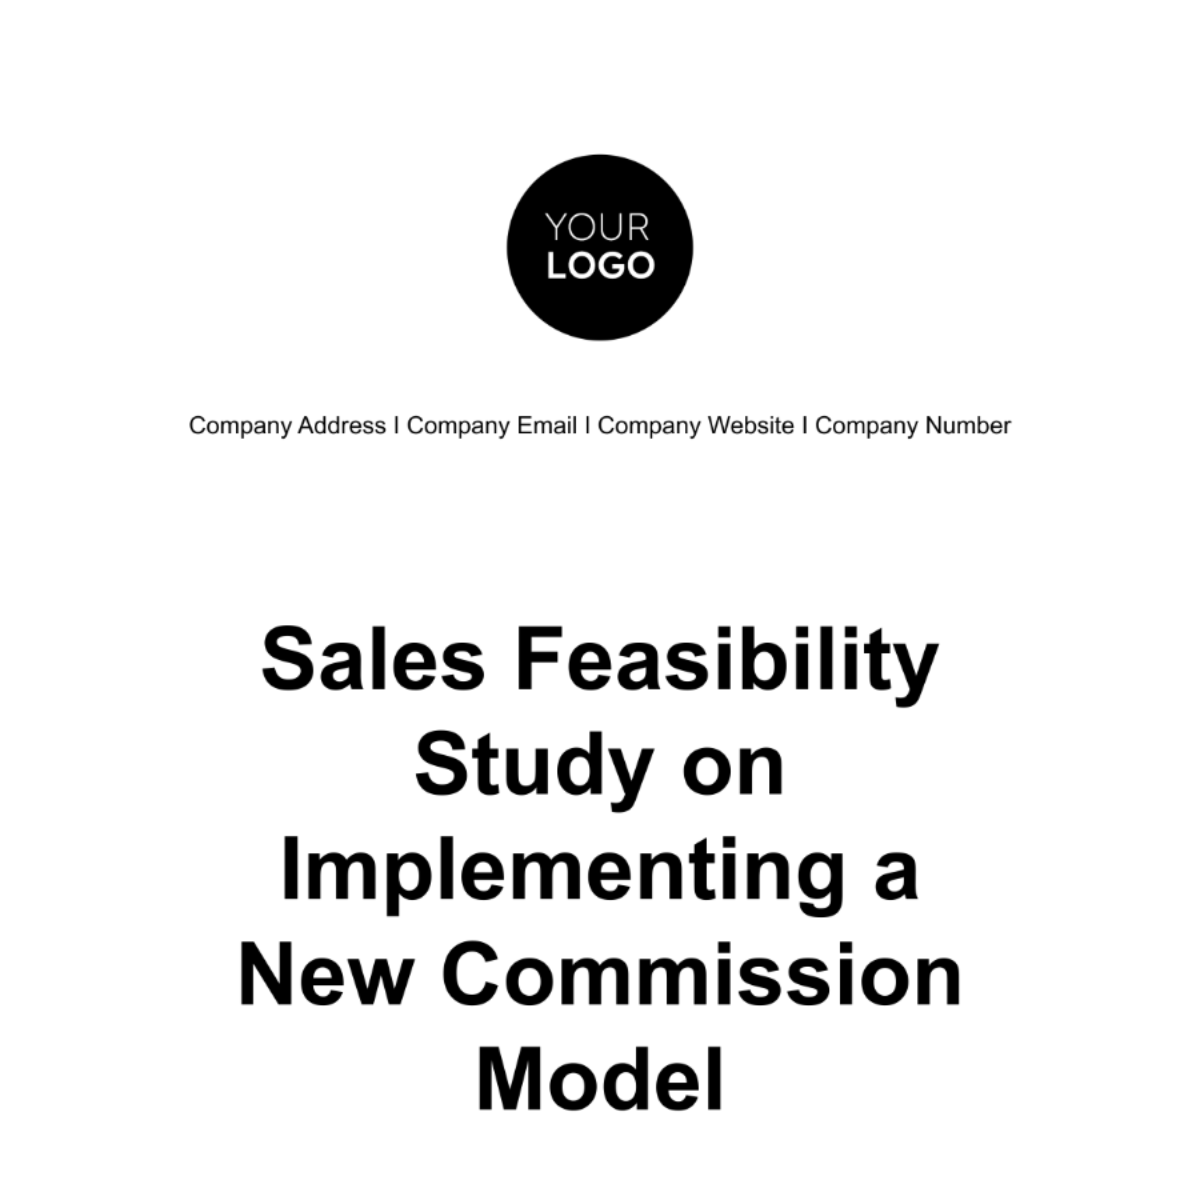 Sales Feasibility Study on Implementing a New Commission Model Template